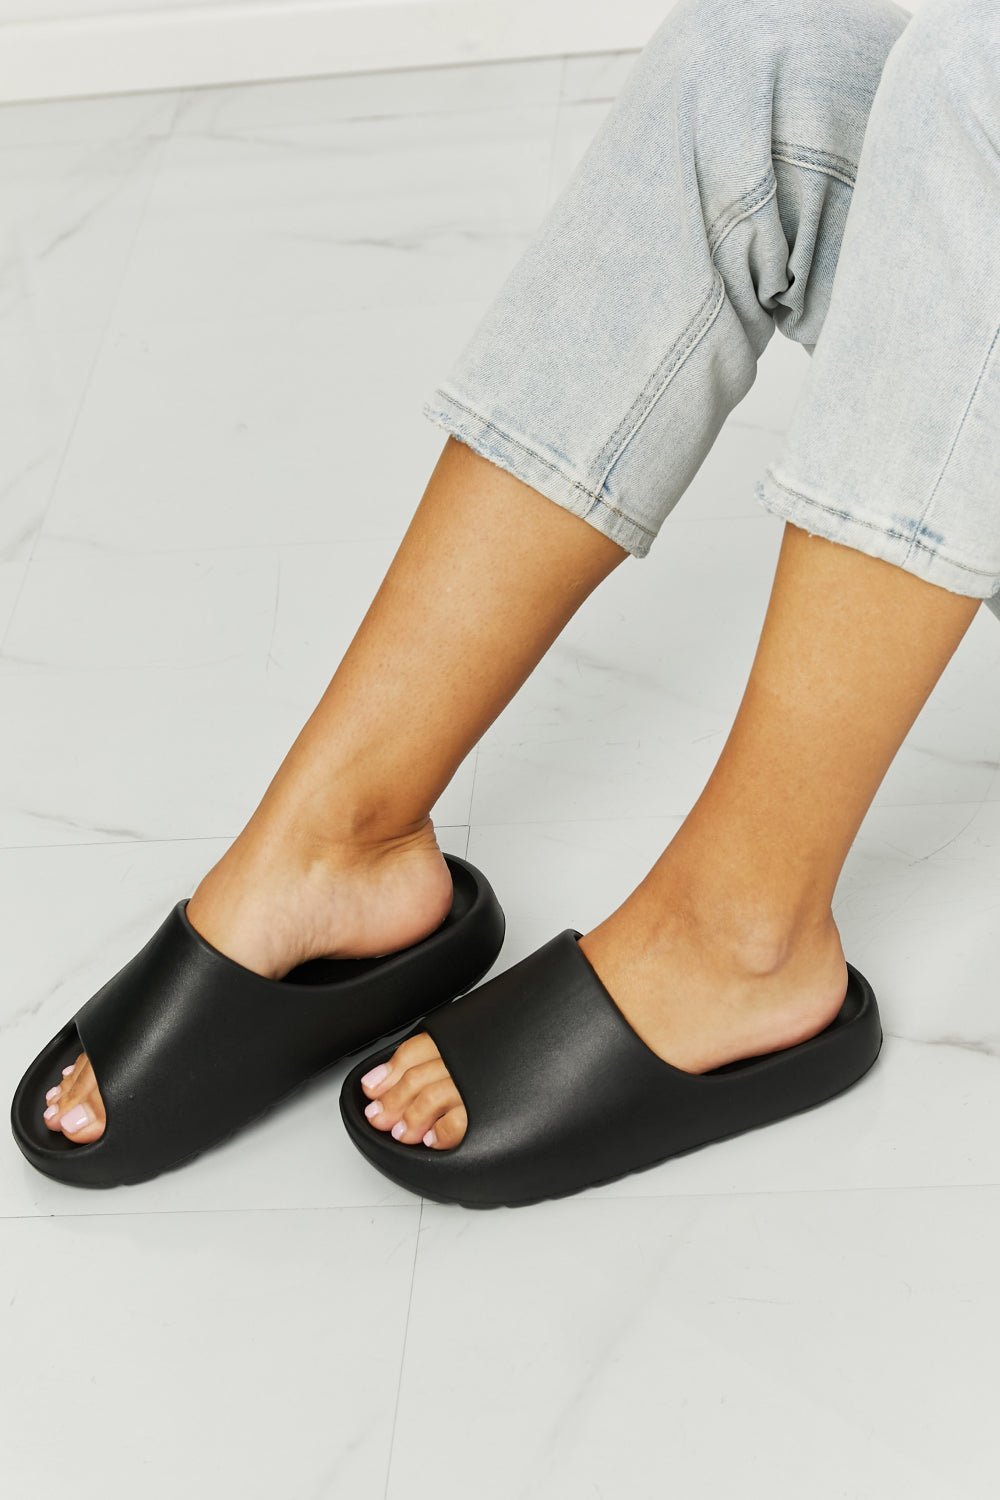 Comfort Zone Slides in Black GOTIQUE Collections